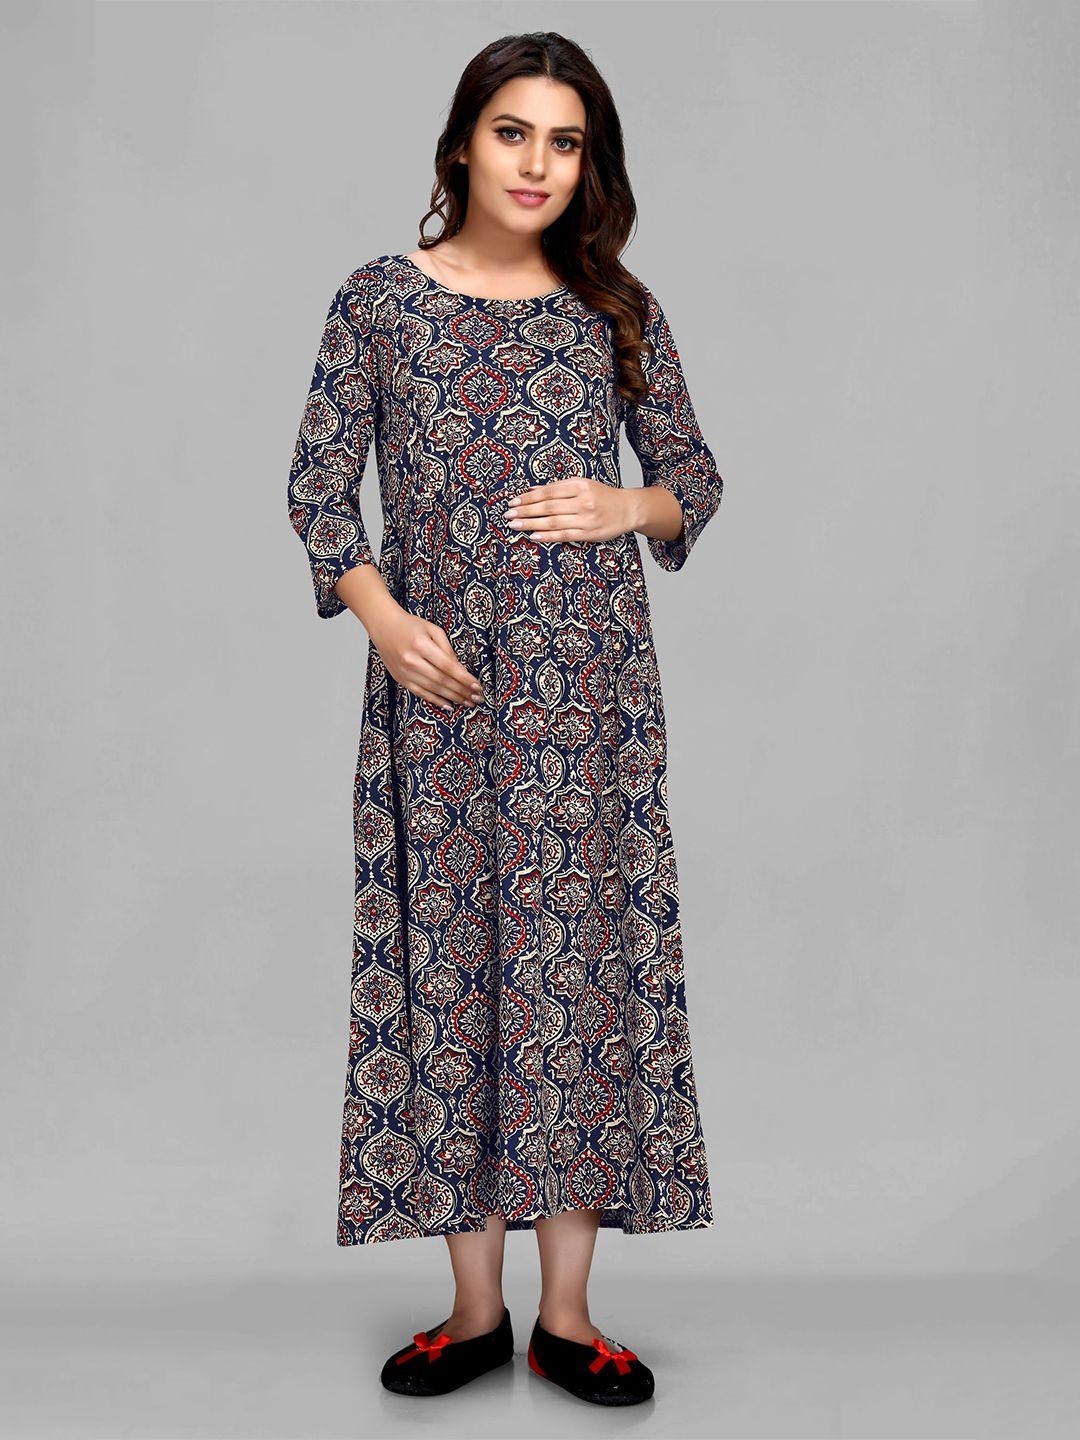 maiyee-ethnic-motifs-printed-round-neck-maternity-fit-&-flare-maxi-ethnic-dress